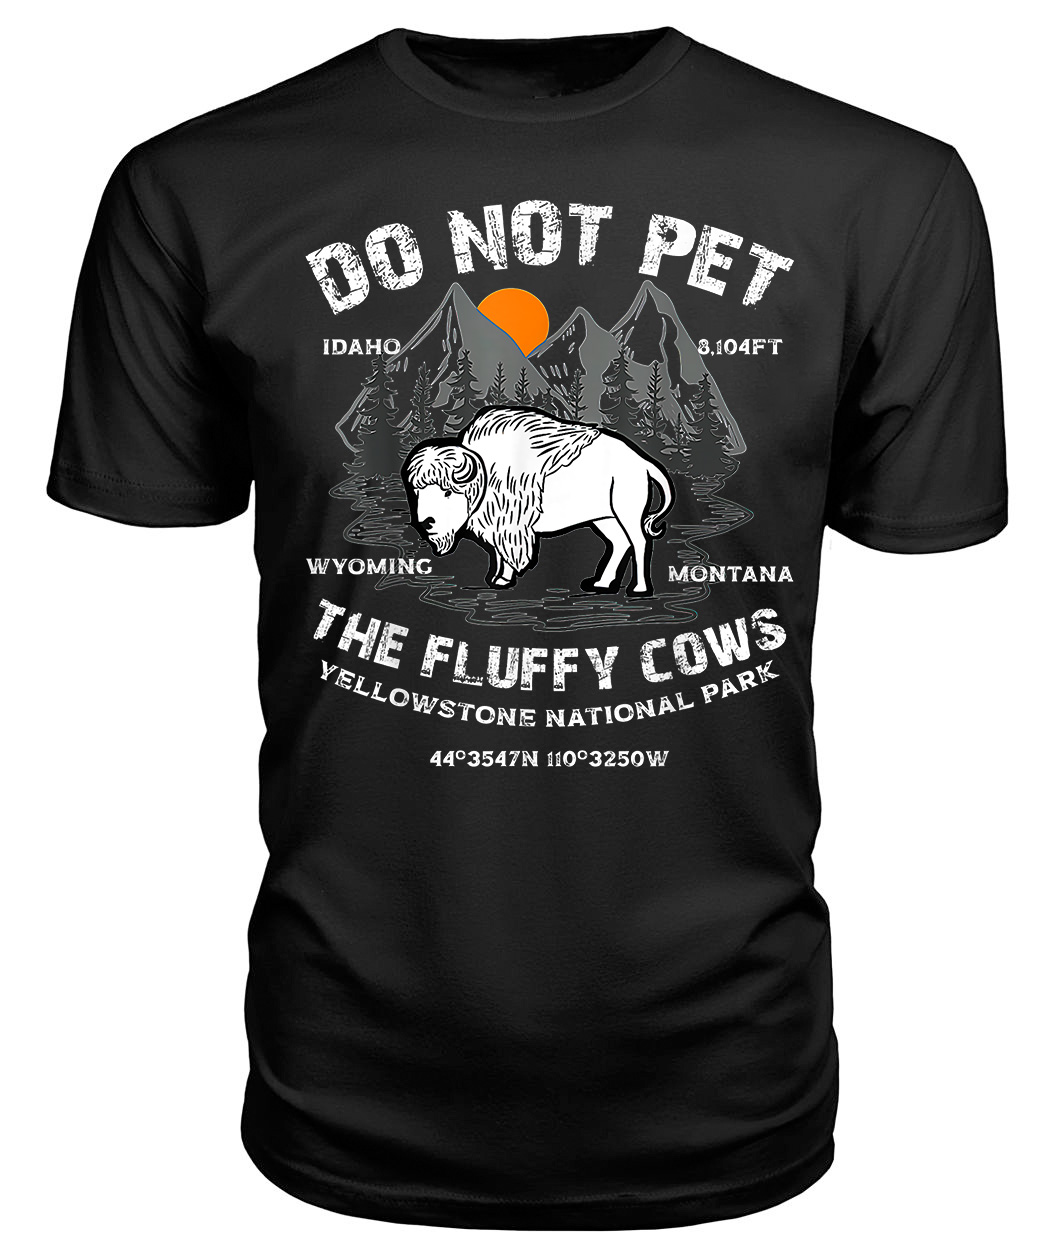 Do Not Pet The Fluffy Cows Bison Yellowstone National Park T-shirt Full Size Up To 5xl